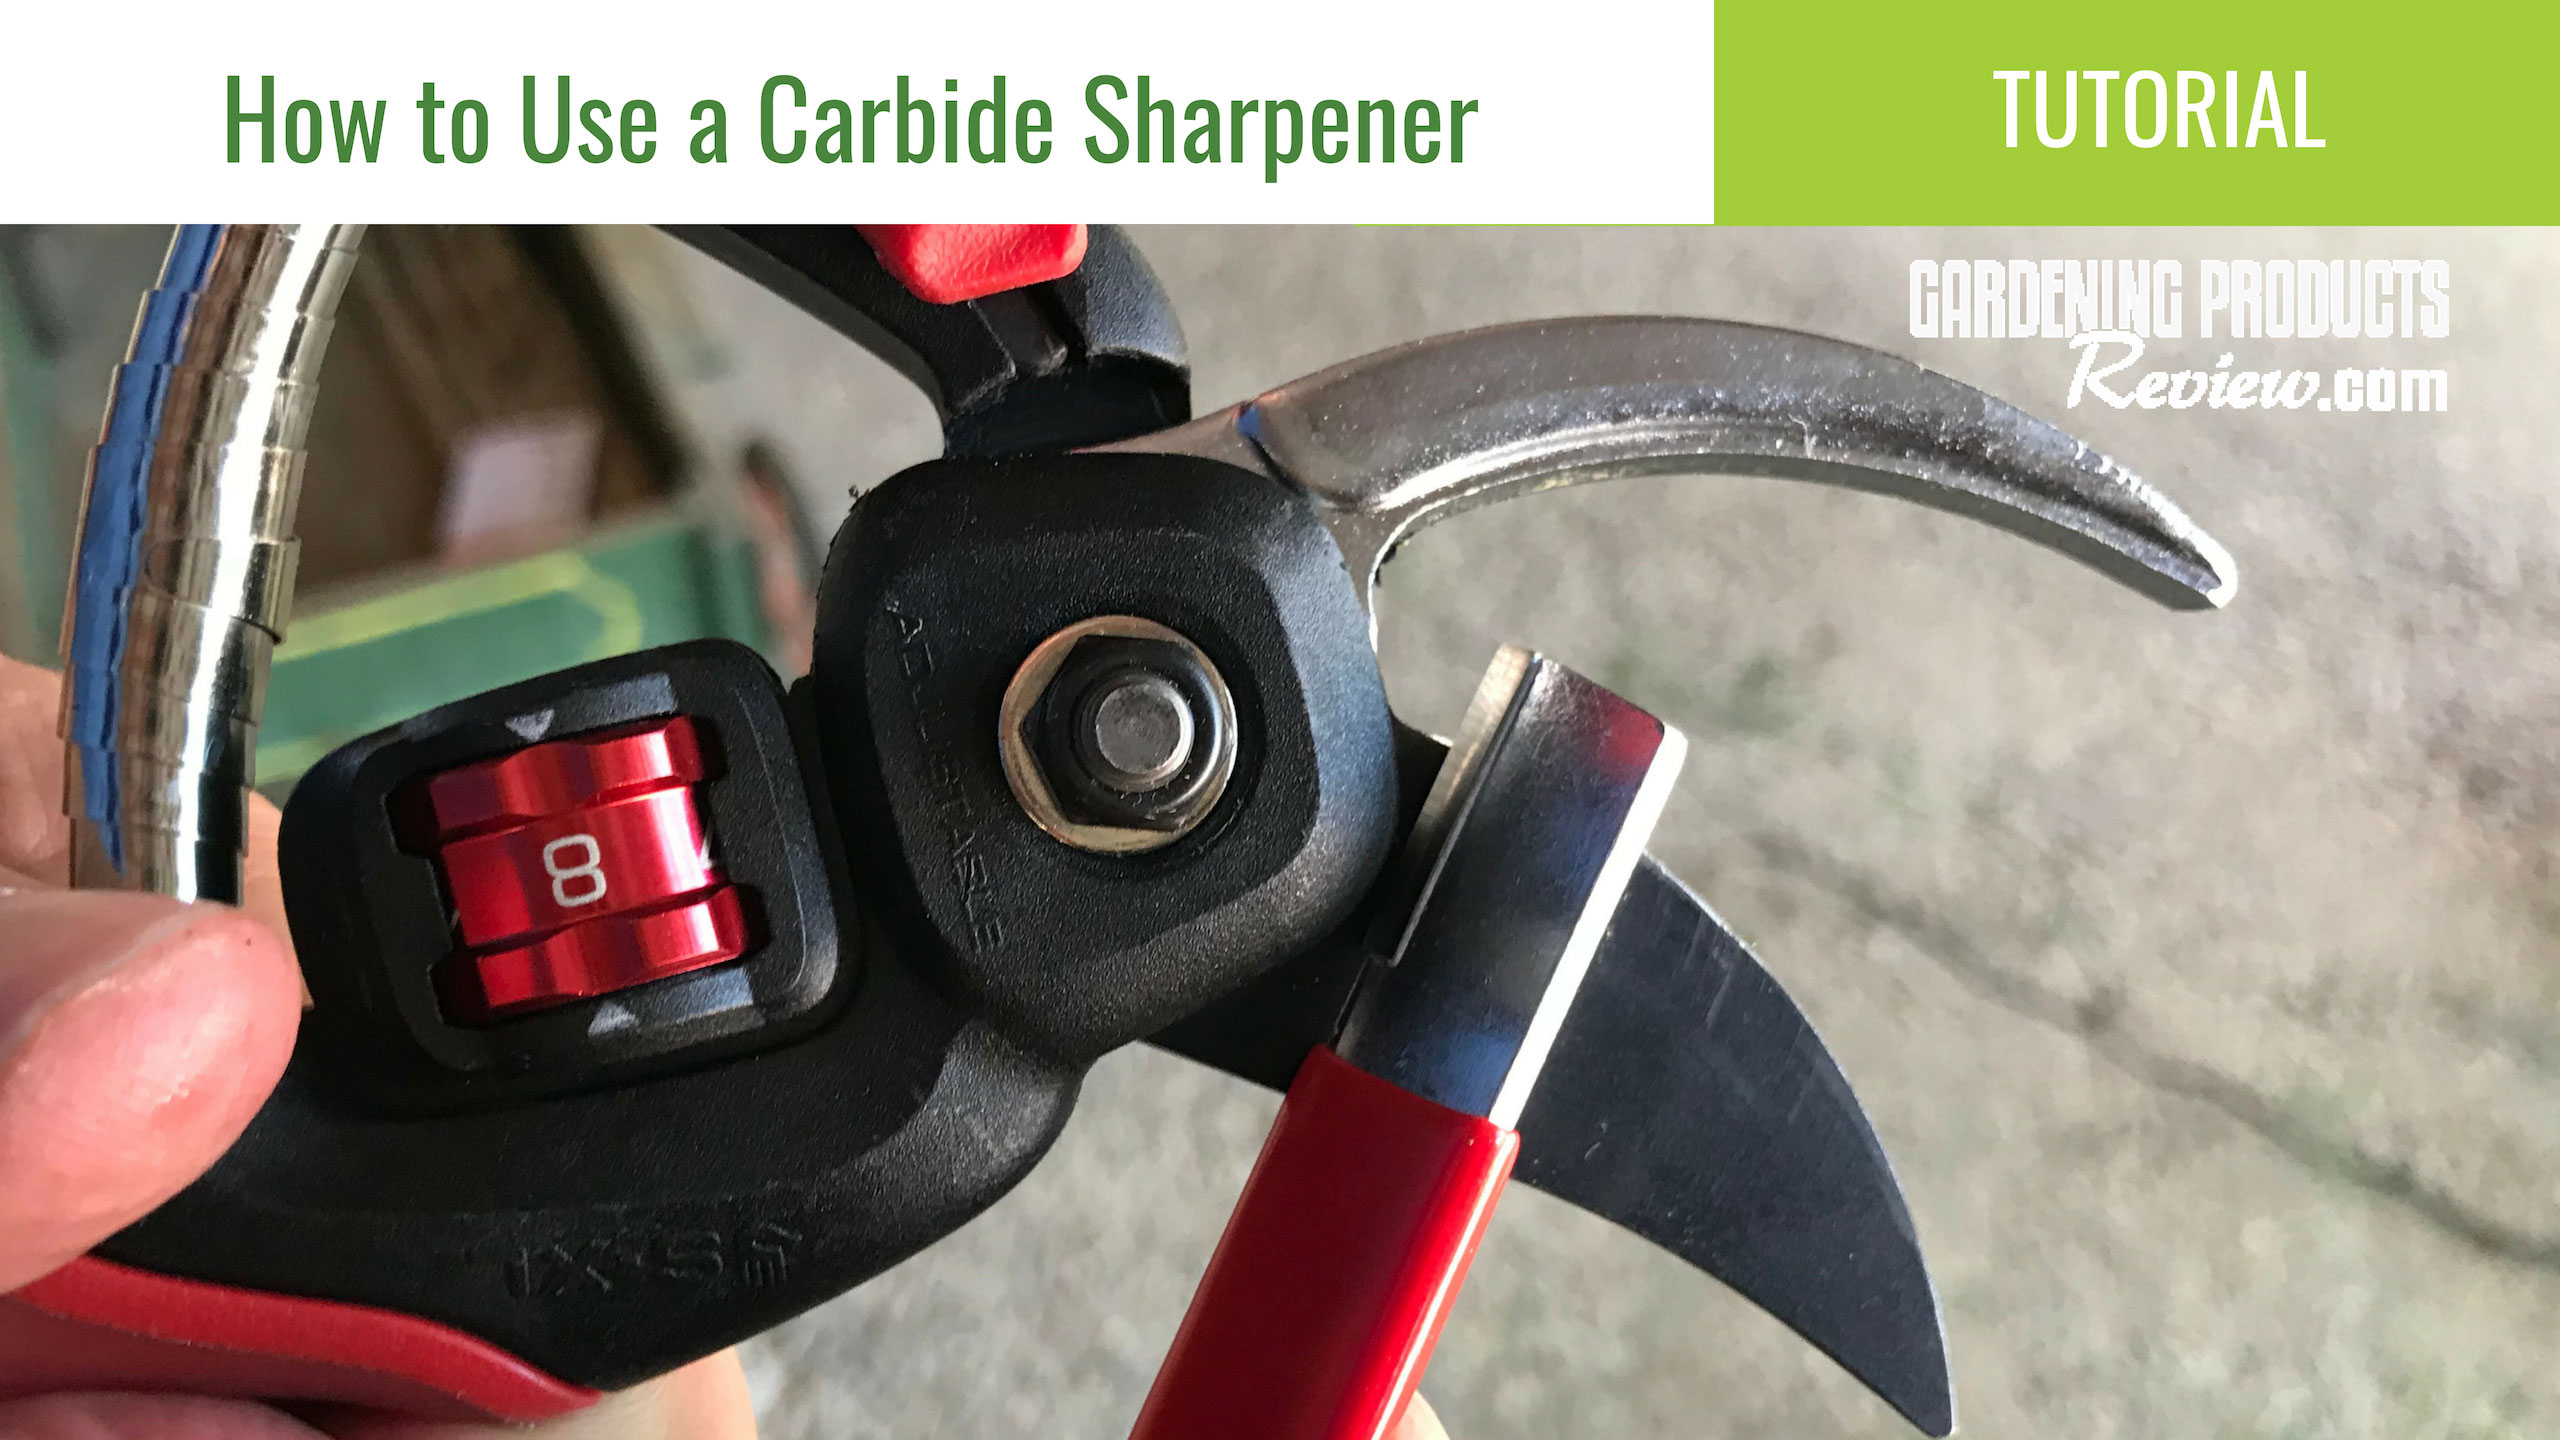 Best Sharpeners for Gardening & Landscape Tools: Guide, Reviews &  Recommendations - Gardening Products Review